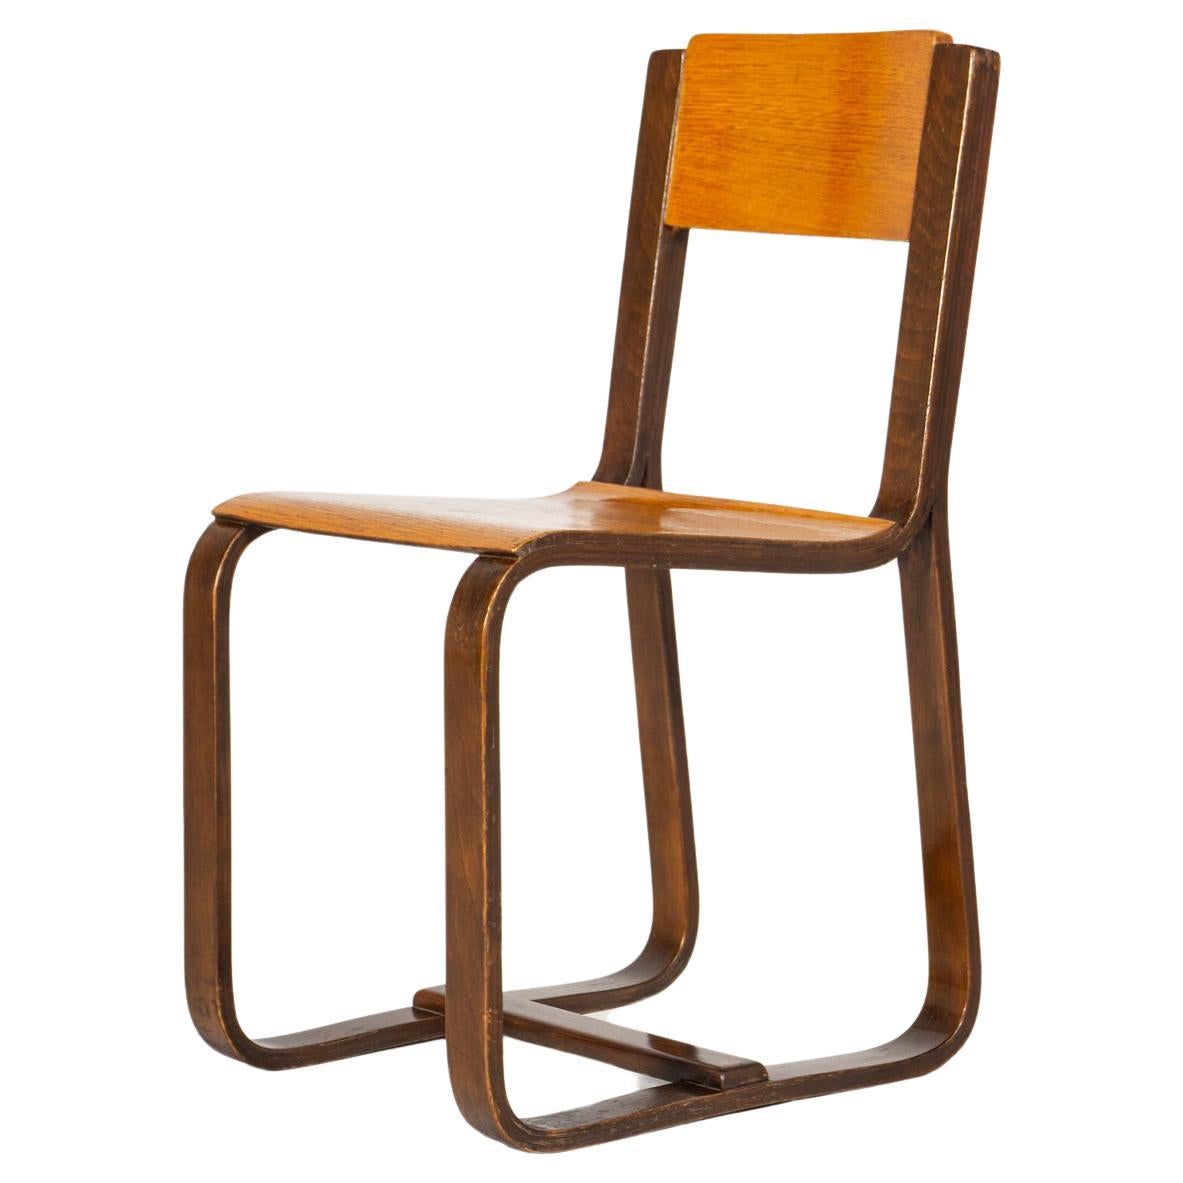 Chair by Giuseppe Pagano Pogatschnig,  1938 For Sale